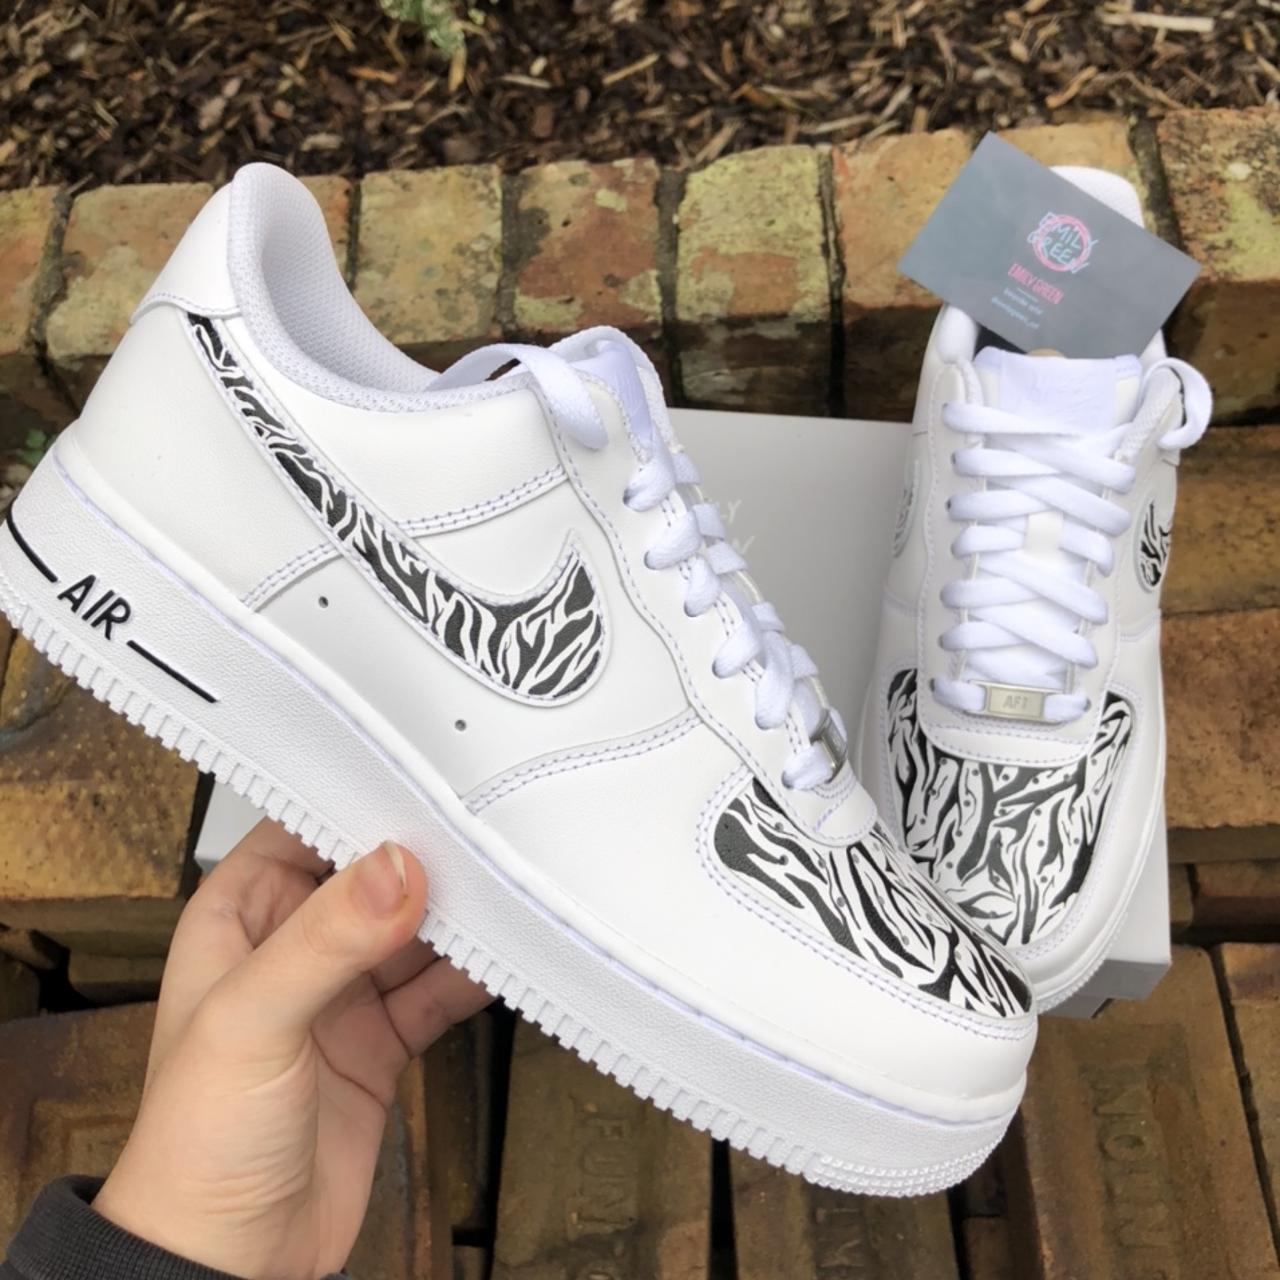 Nike Women's Black and White Trainers | Depop